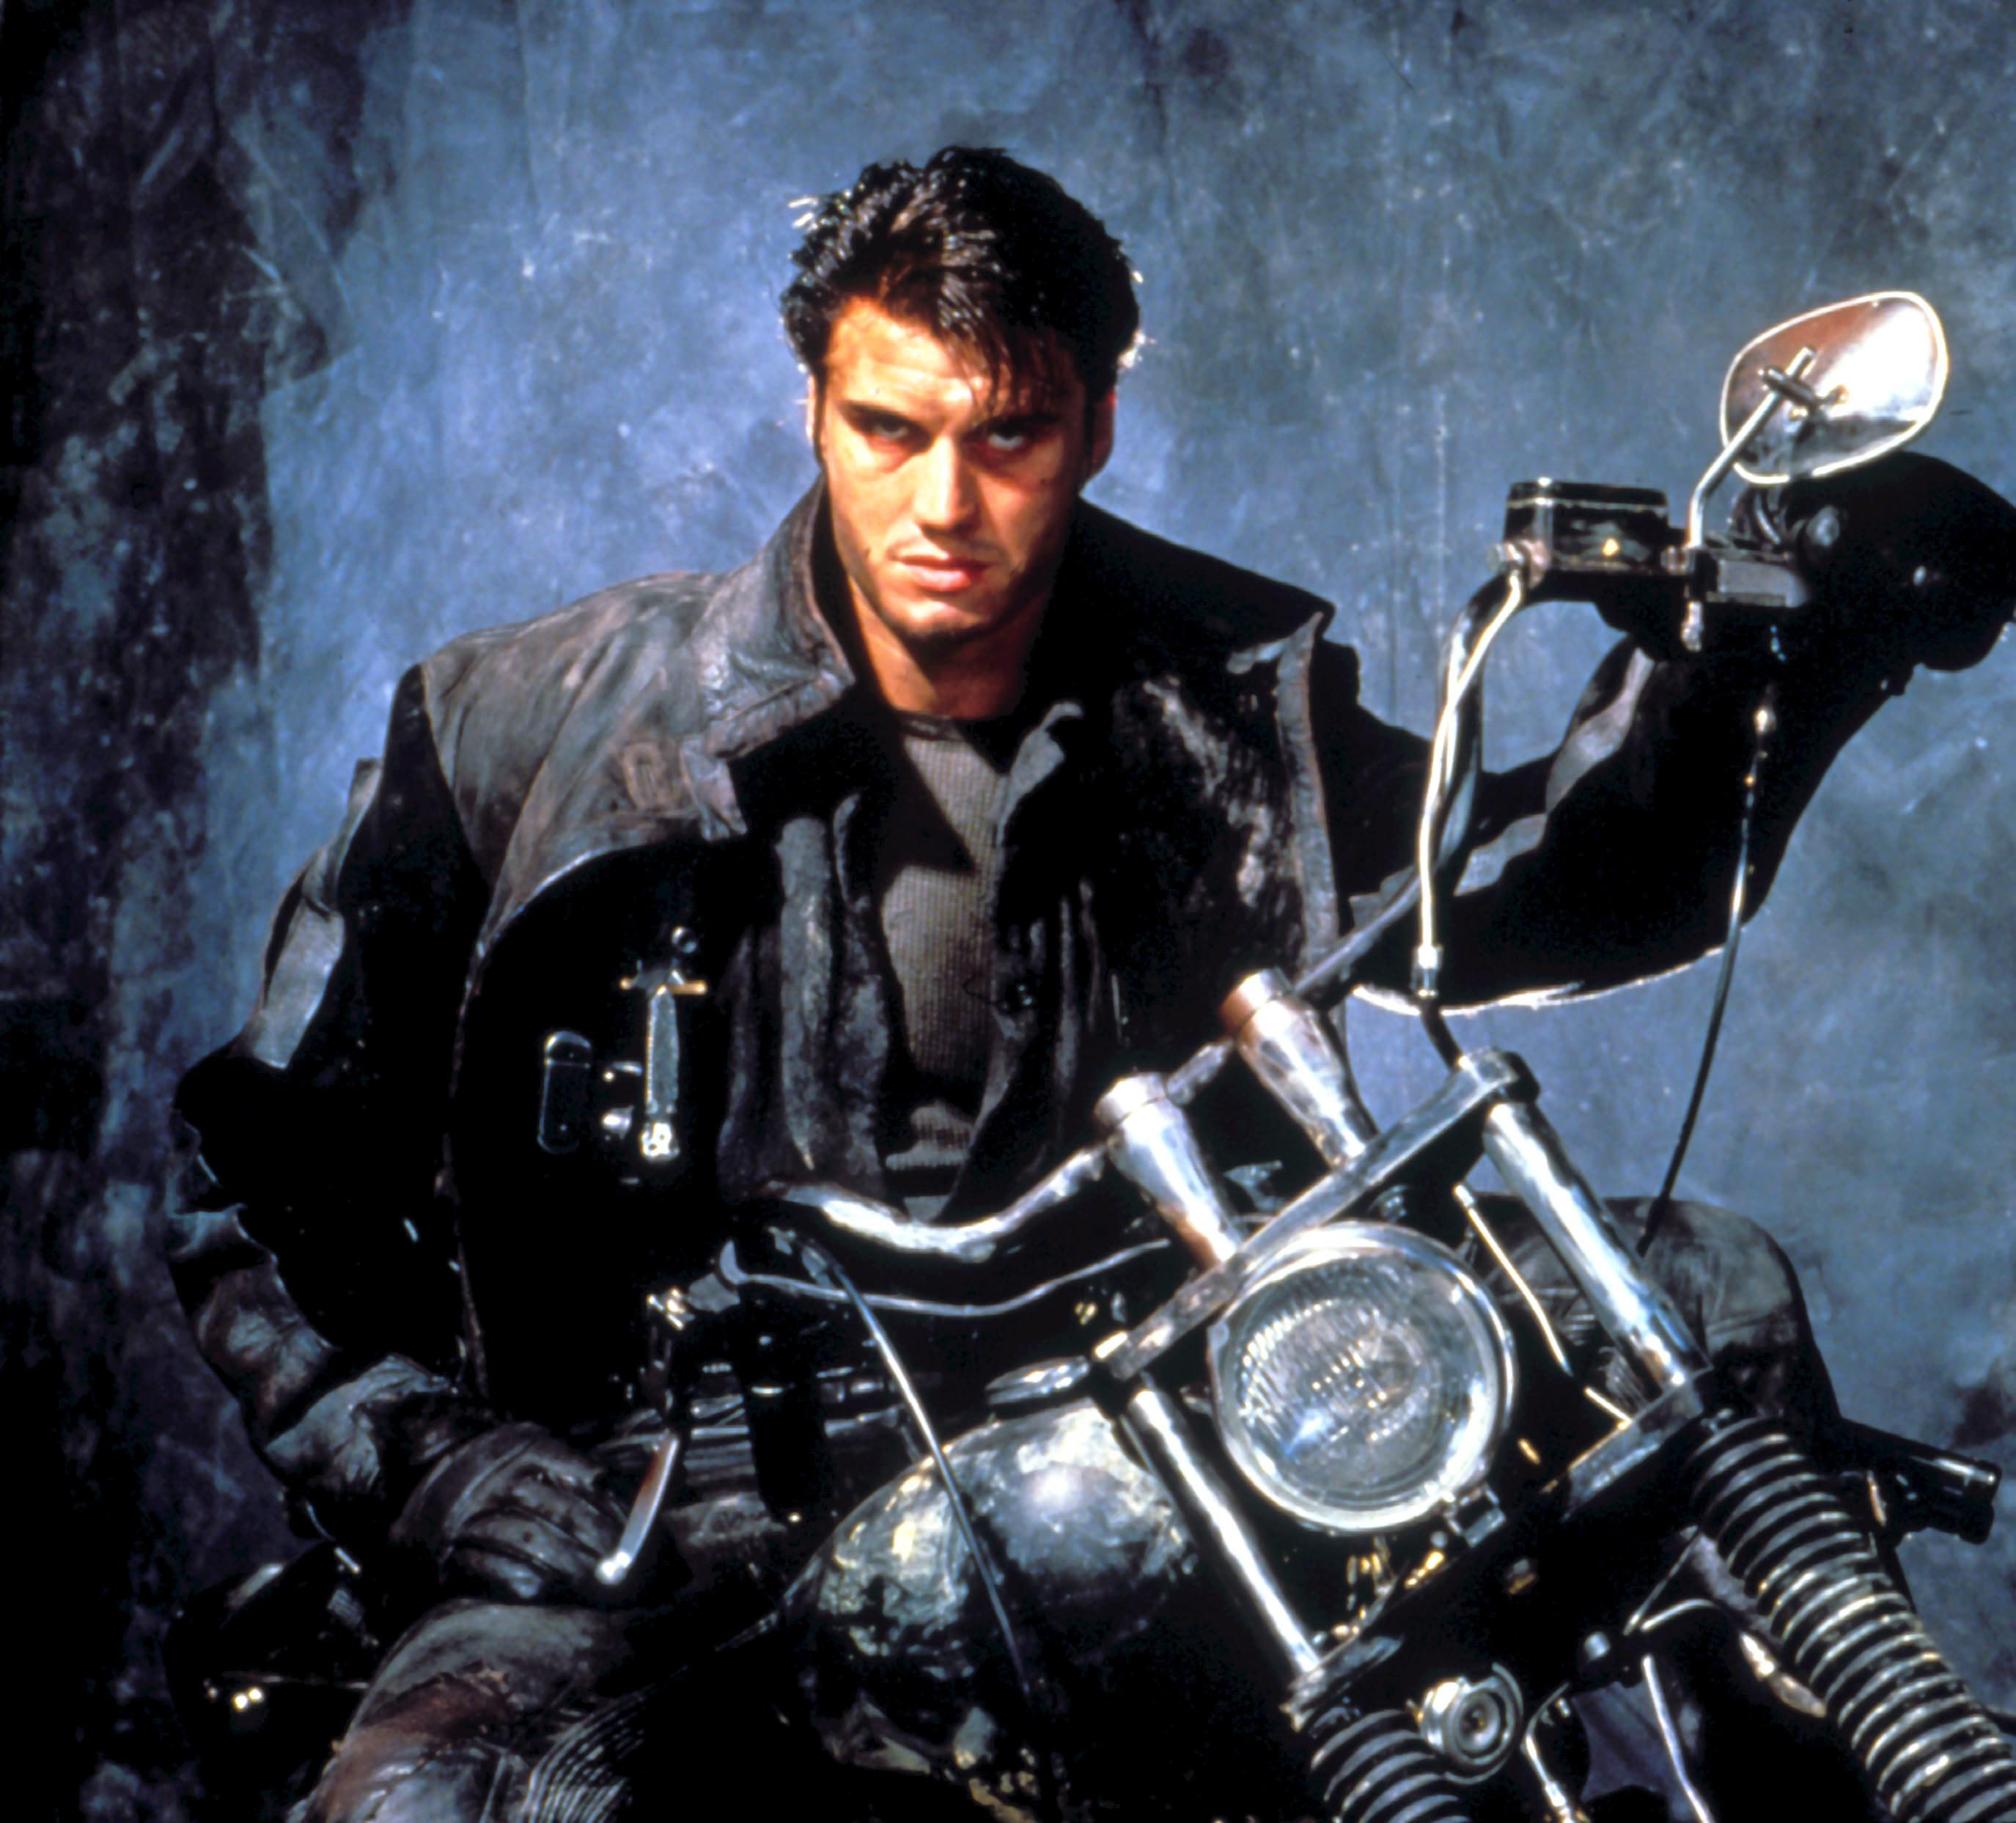 An imposing man in tattered leathers sits atop a motorcycle with a haunted stare